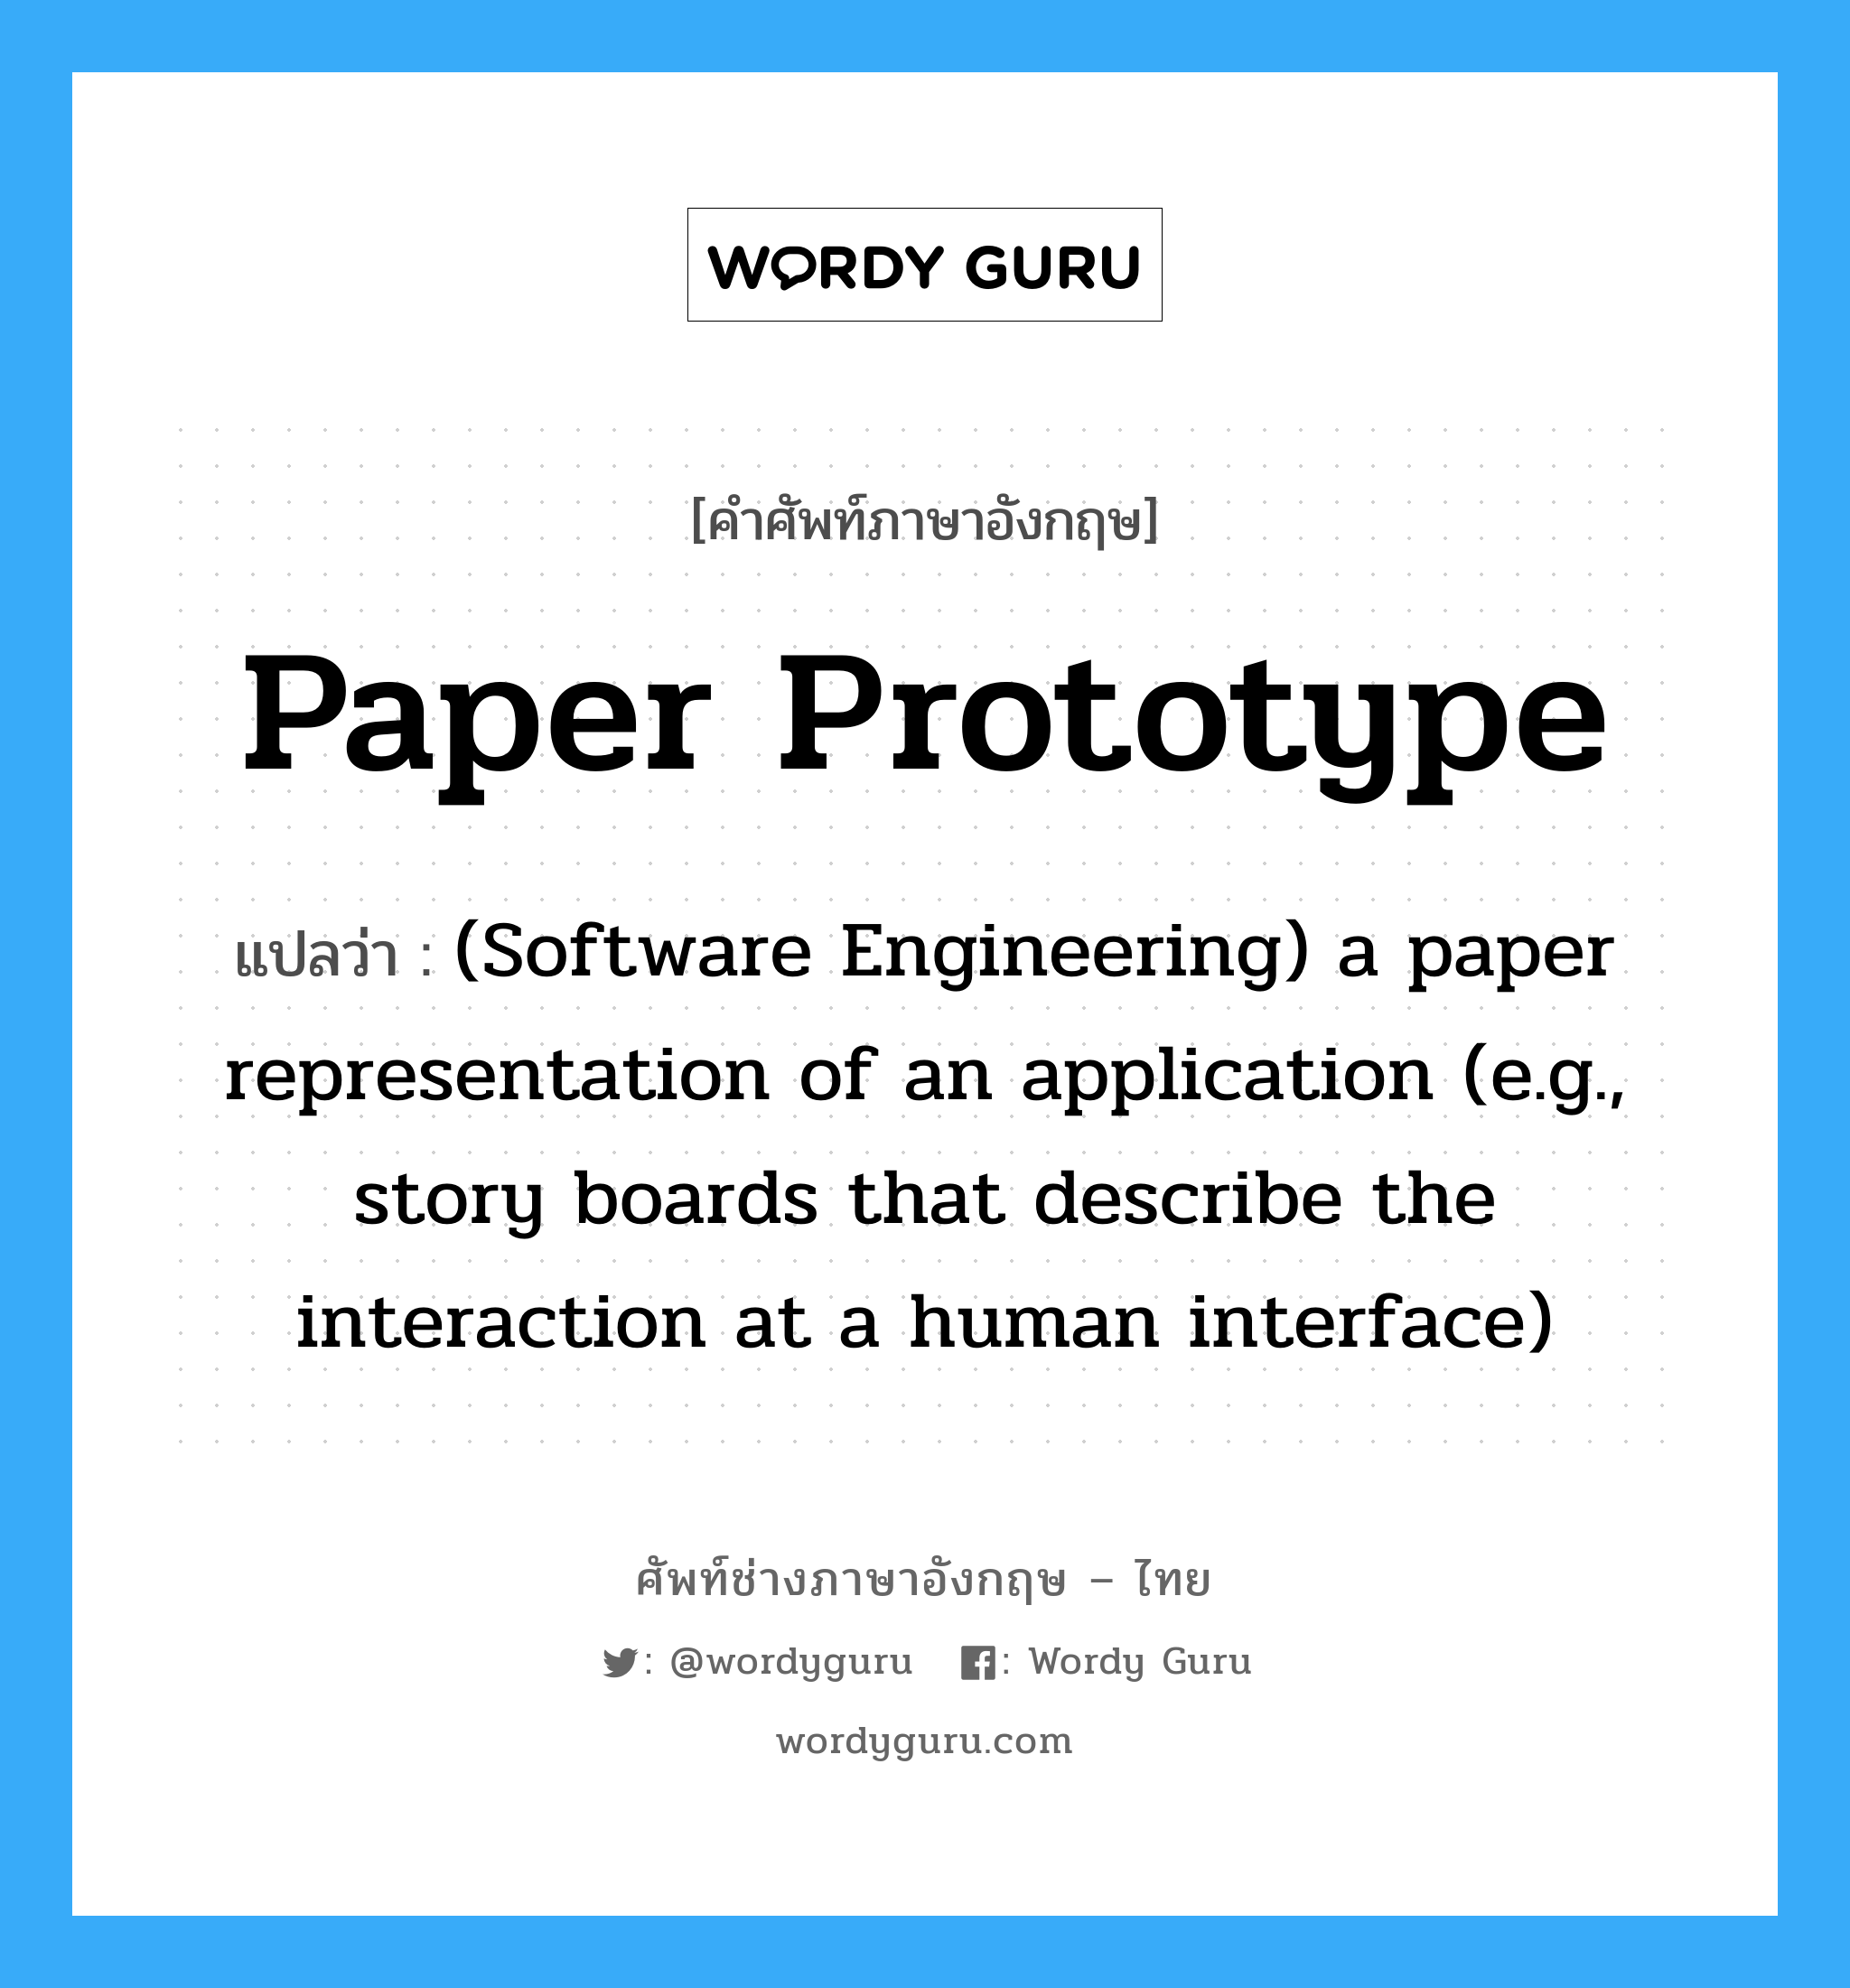 (Software Engineering) a paper representation of an application (e.g., story boards that describe the interaction at a human interface) ภาษาอังกฤษ?, คำศัพท์ช่างภาษาอังกฤษ - ไทย (Software Engineering) a paper representation of an application (e.g., story boards that describe the interaction at a human interface) คำศัพท์ภาษาอังกฤษ (Software Engineering) a paper representation of an application (e.g., story boards that describe the interaction at a human interface) แปลว่า Paper prototype